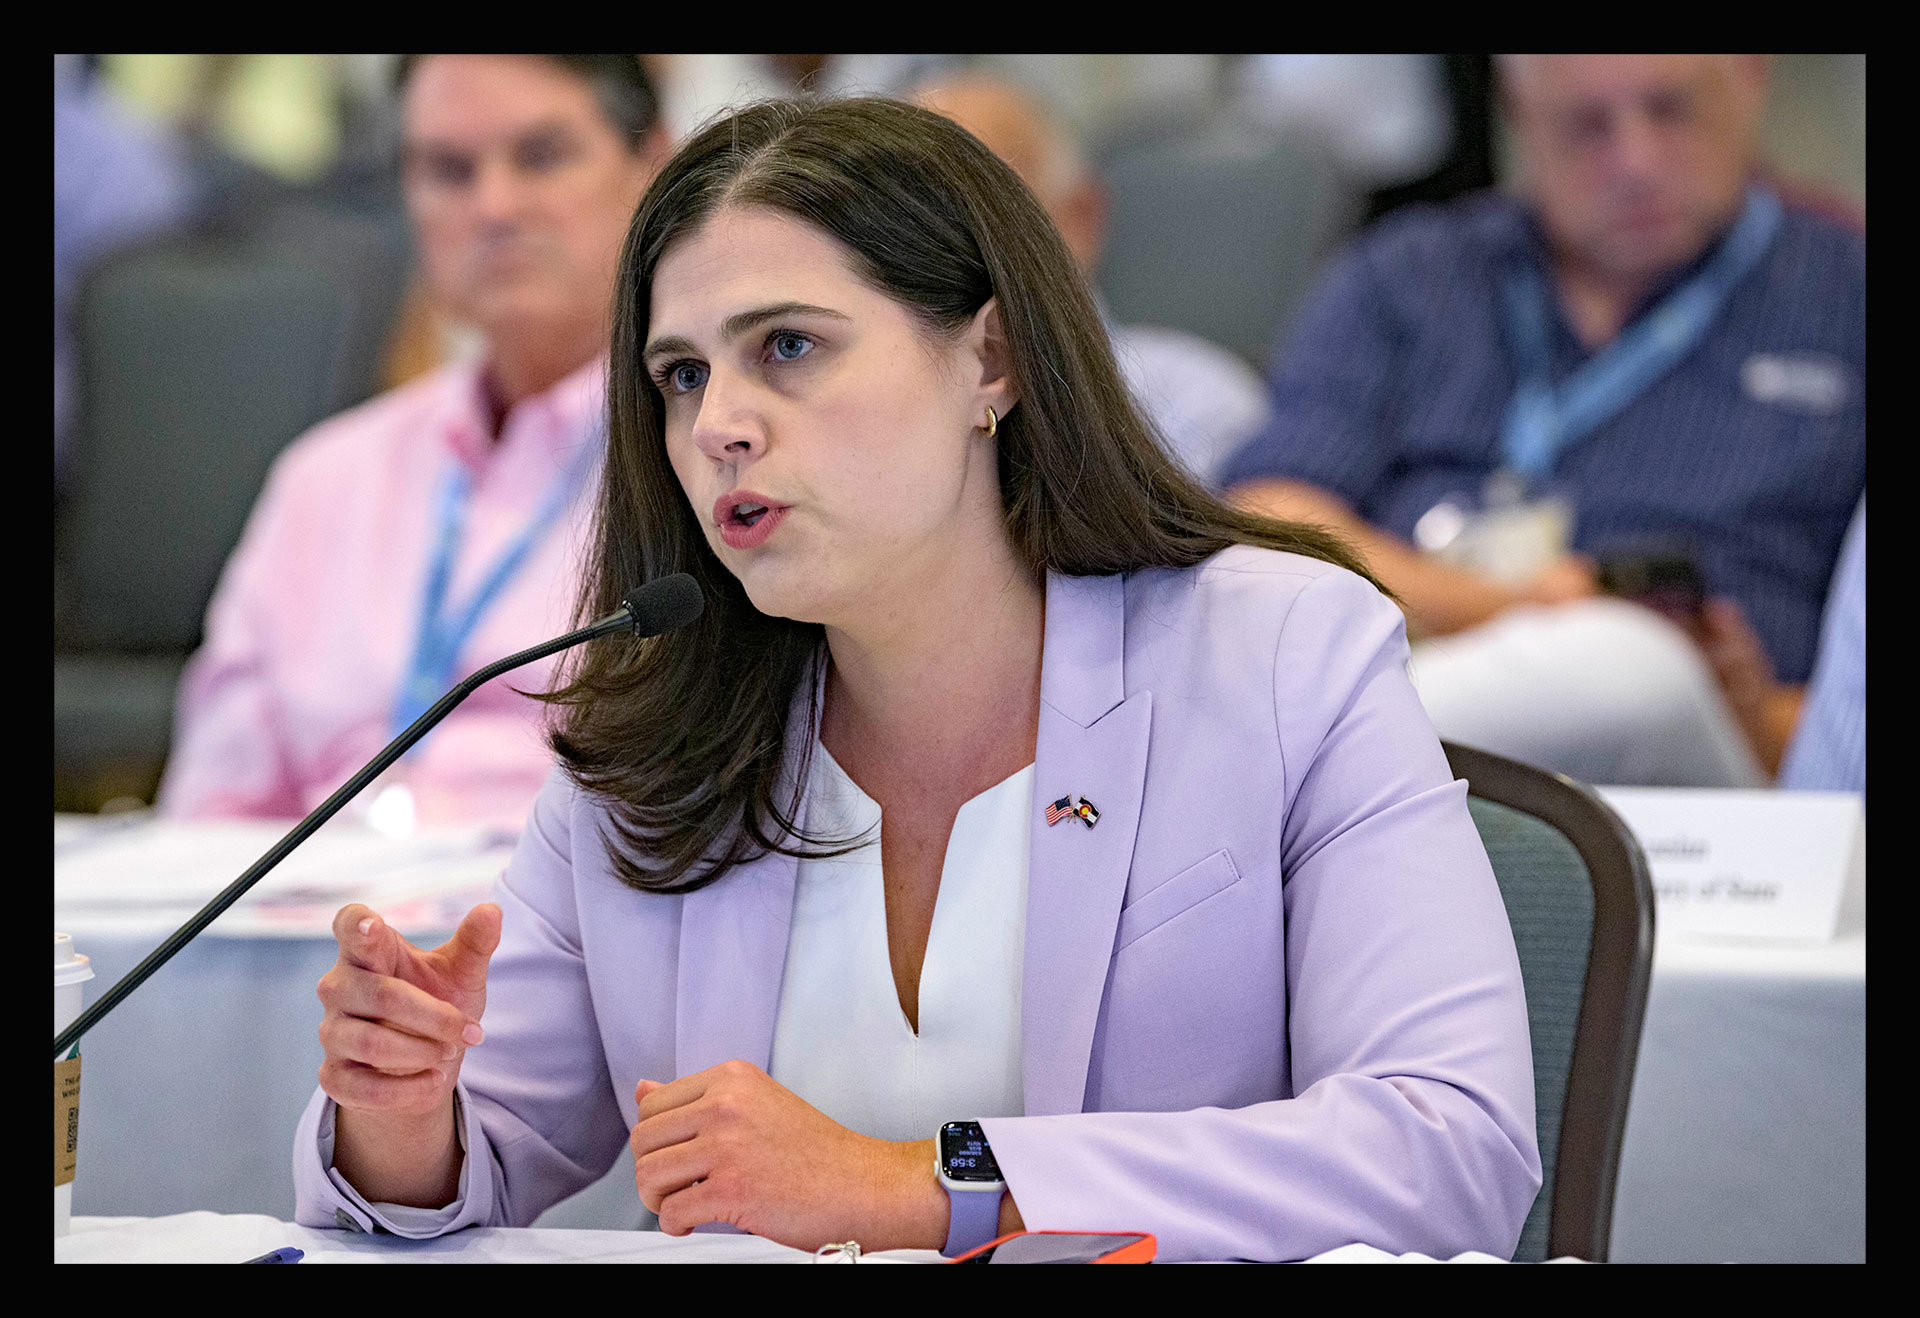 Colorado Secretary of State Jena Griswold talks about recent threats against her in Colorado during a committee meeting at the summer conference of the National Association of Secretaries of State in Baton Rouge, La., on July 8, 2022.